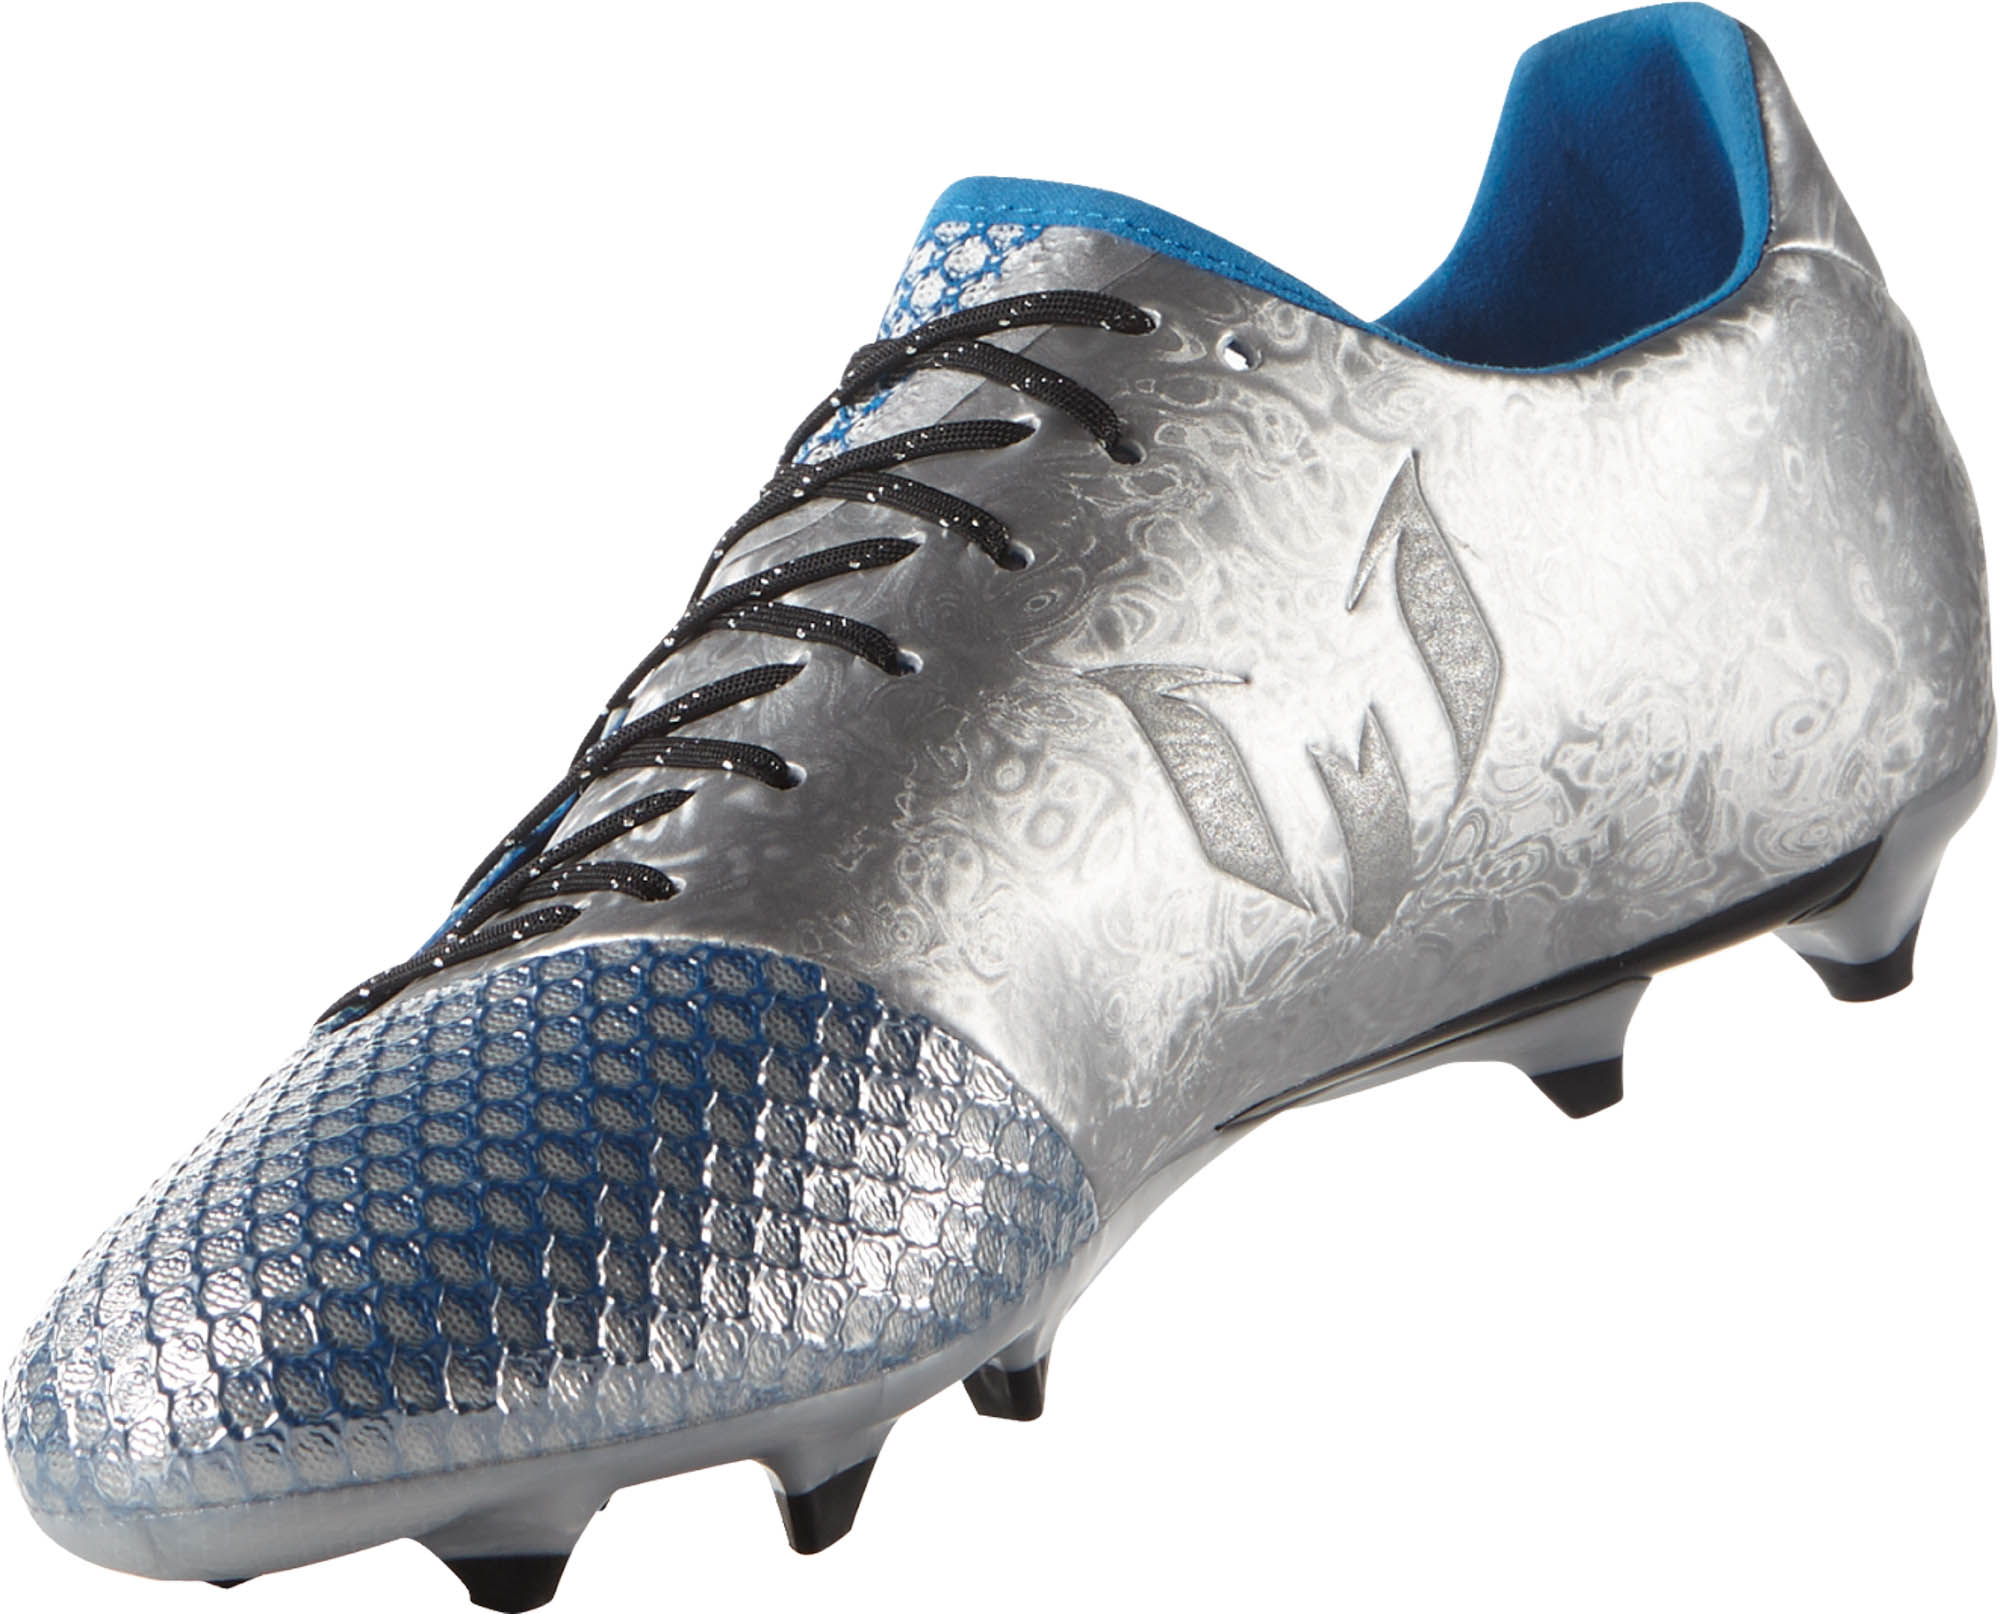 adidas Messi 16.2 FG Cleats - Silver adidas Soccer Shoes